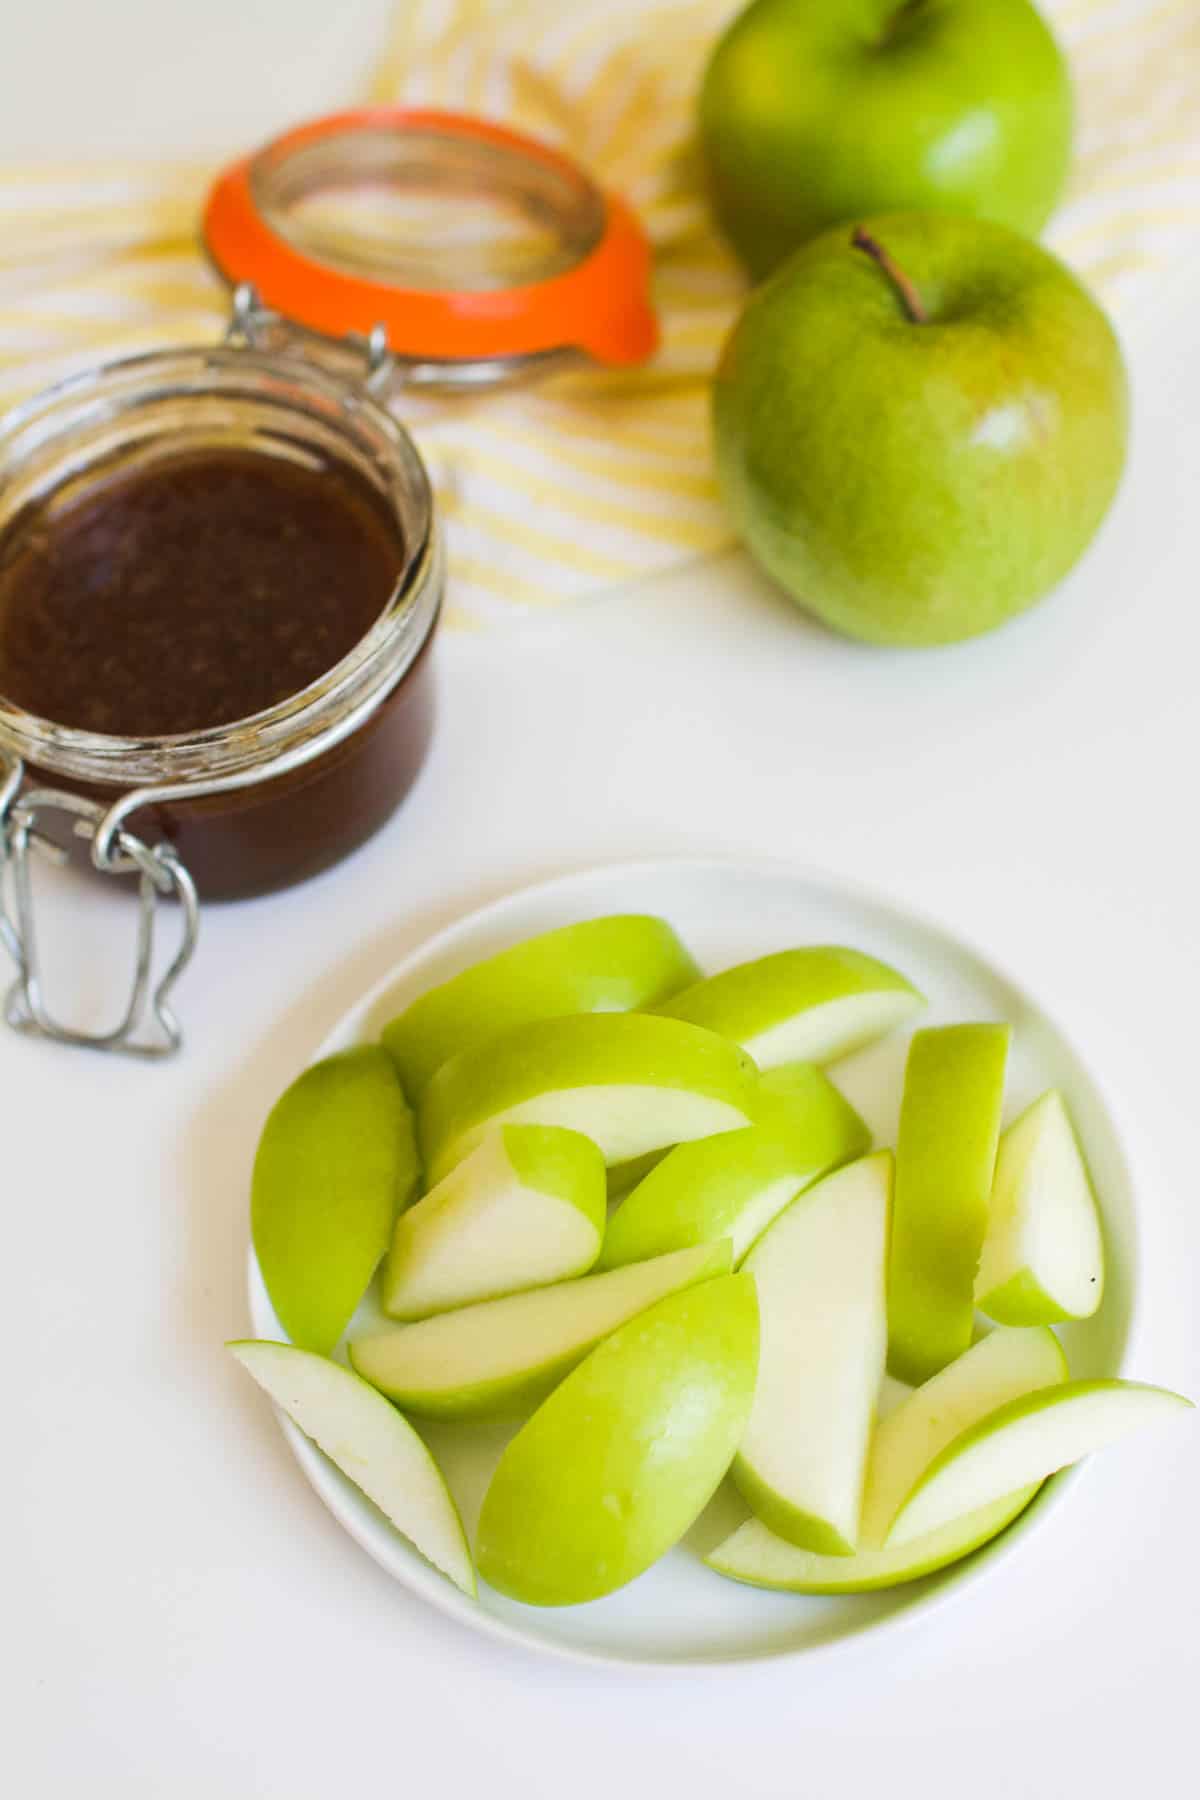 Sliced green apples on a small plate next to apple honey dip in a jar.